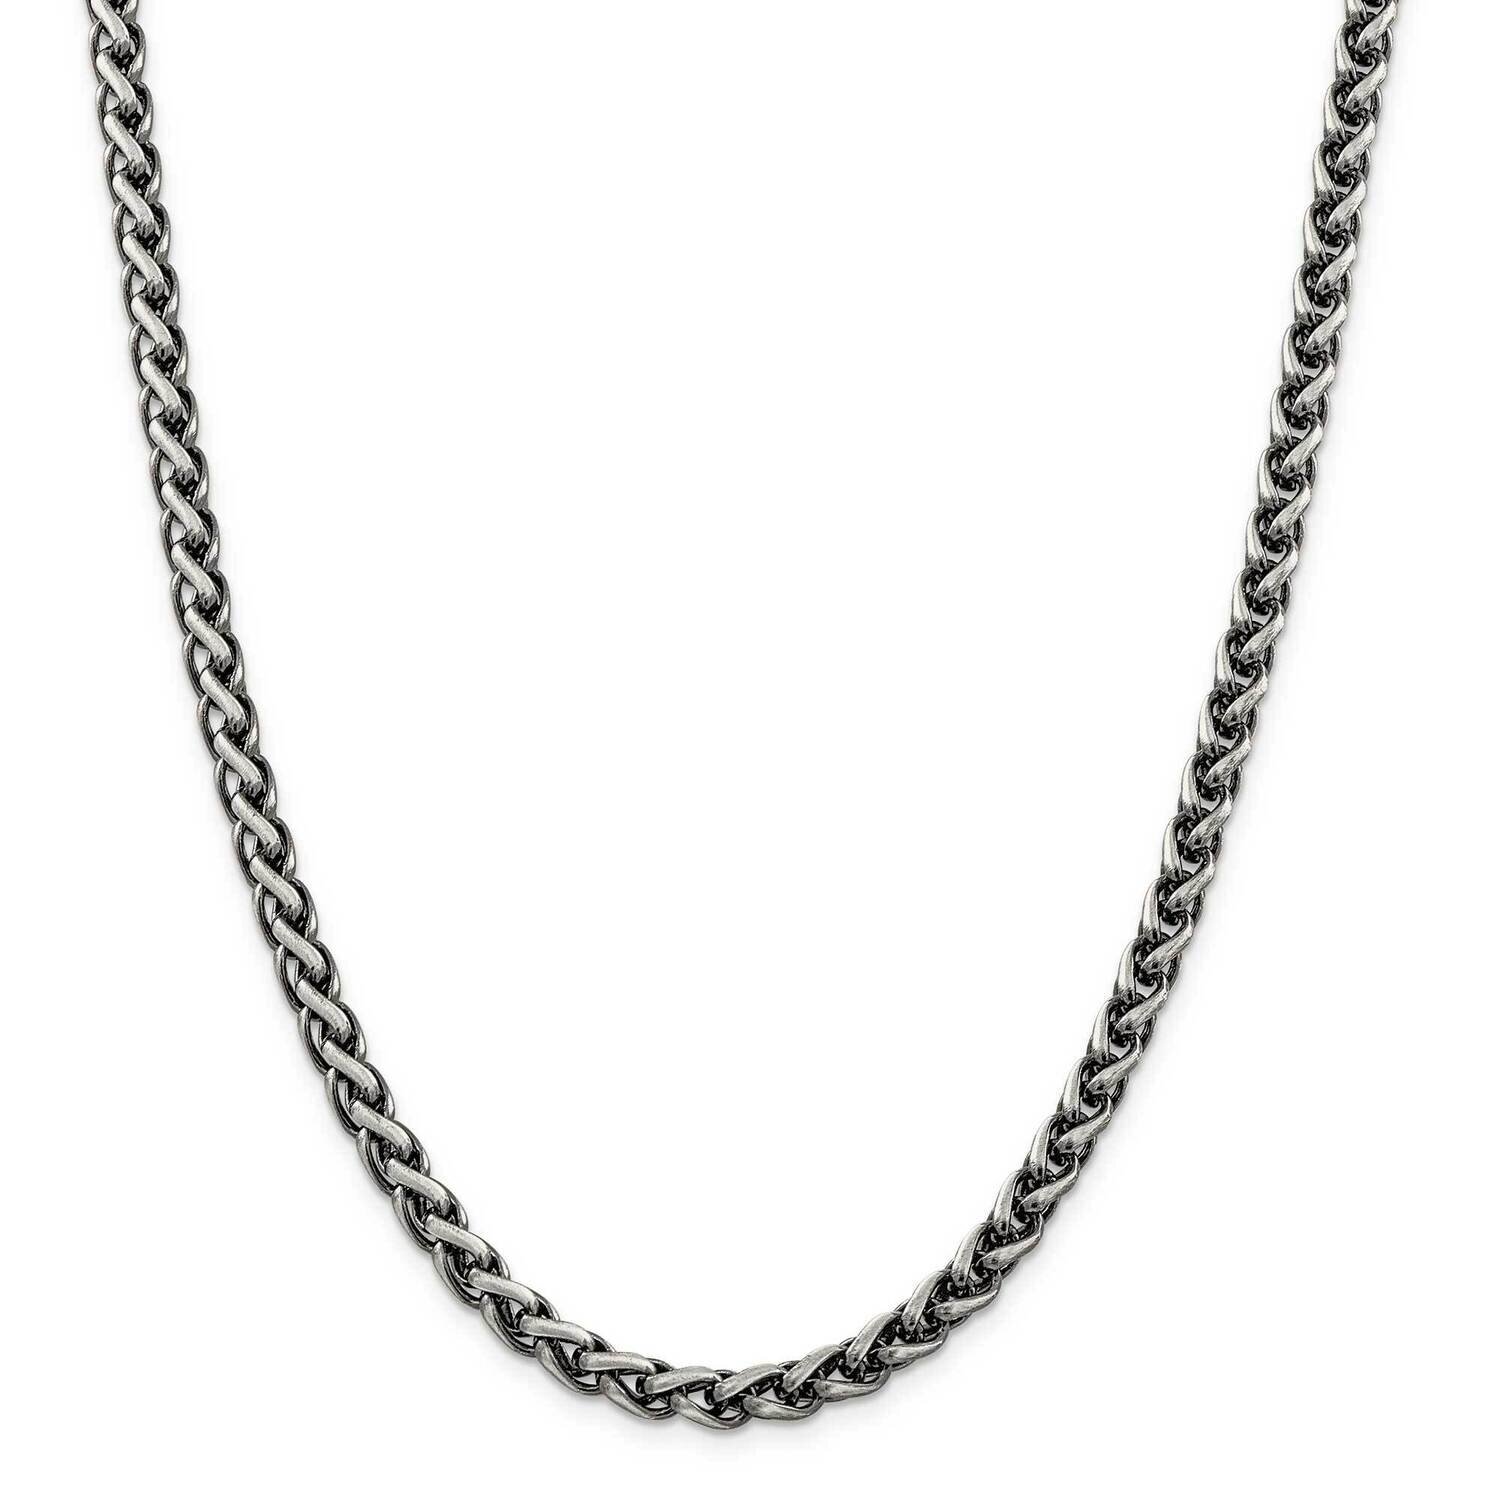 6mm Round Spiga Chain 26 Inch Sterling Silver Antiqued QFC143-26